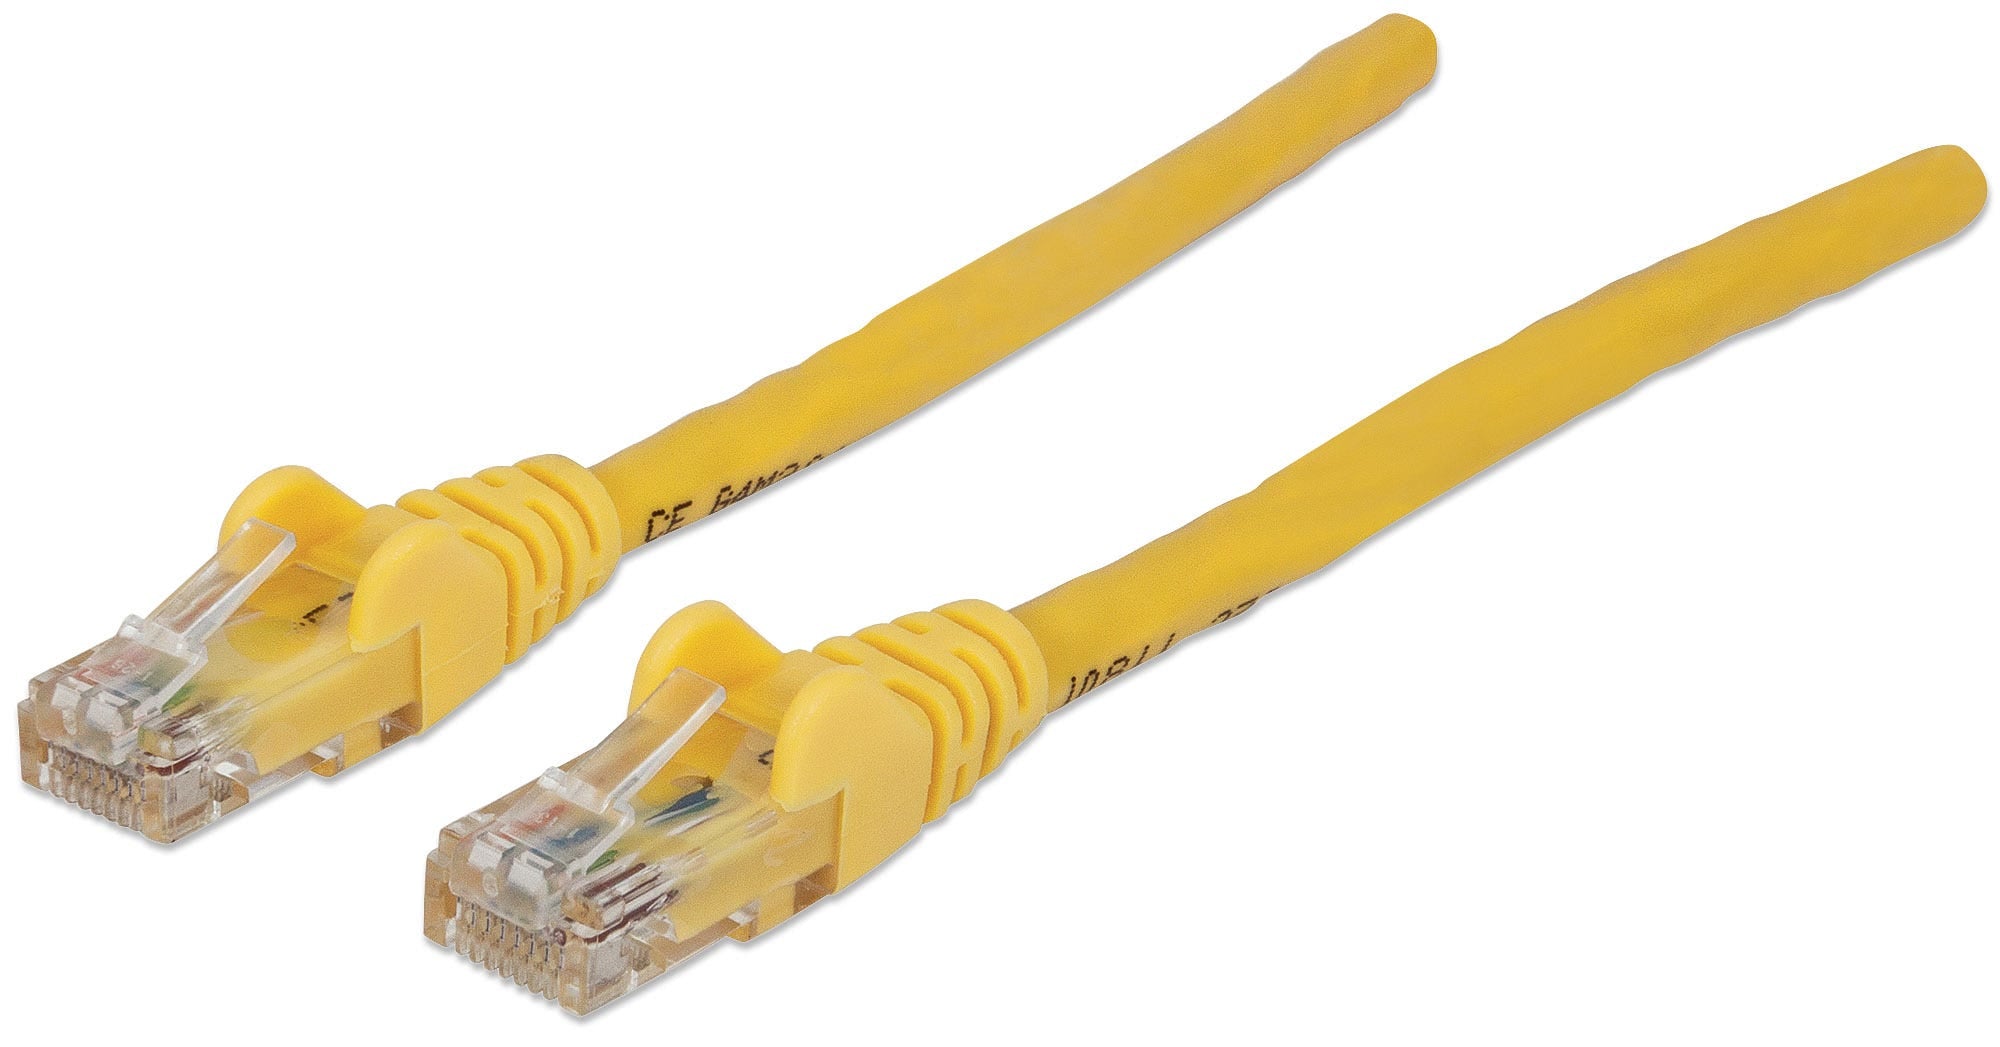 Intellinet Network Patch Cable, Cat6, 1m, Yellow, CCA, U/UTP, PVC, RJ45, Gold Plated Contacts, Snagless, Booted, Lifetime Warranty, Polybag